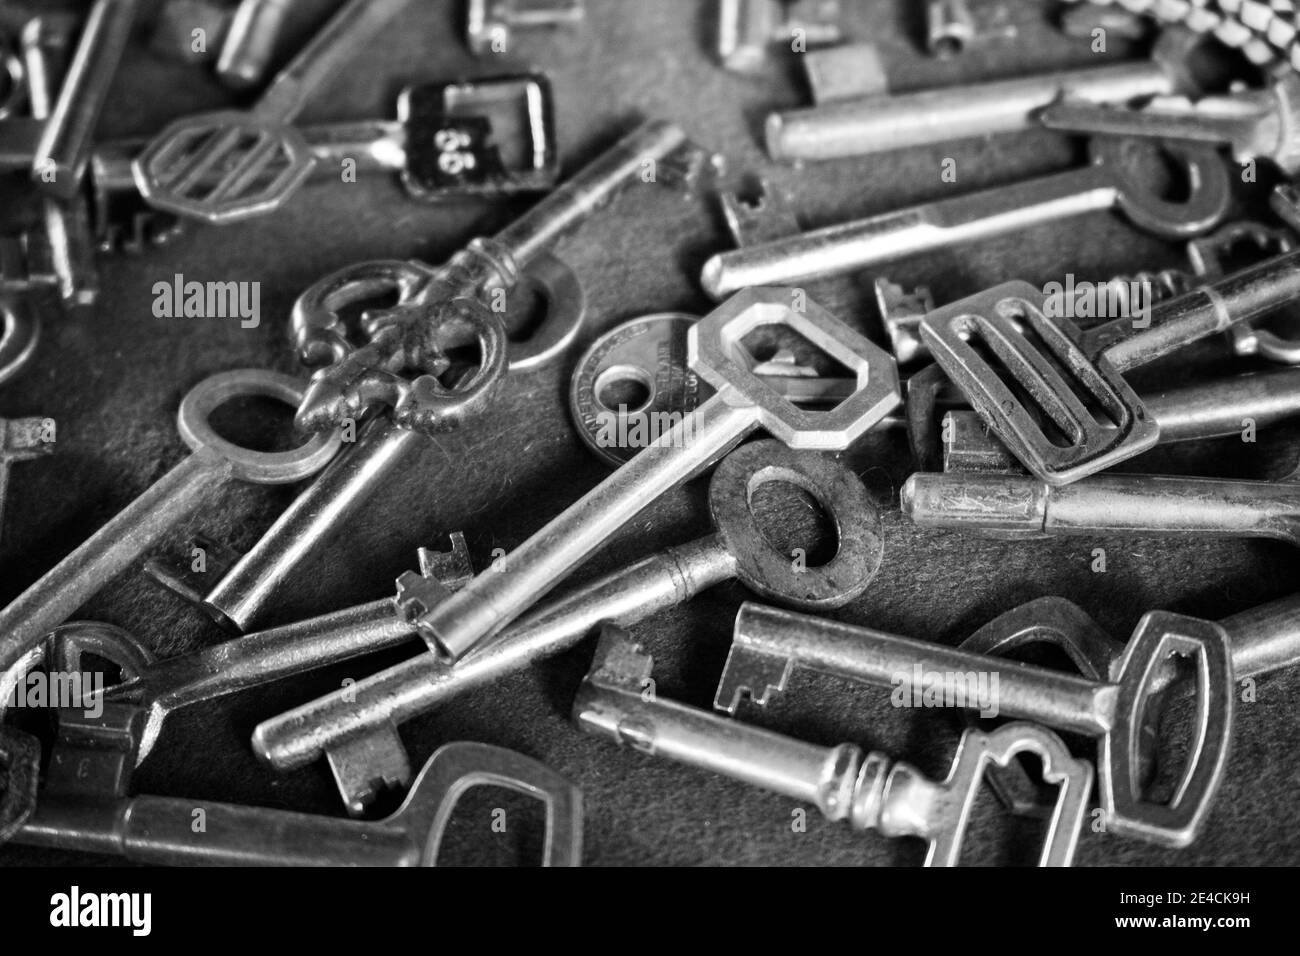 Sao Paulo / Sao Paulo / Brazil - 08 19 2018: Group of different old antique keys together. It seems to be a flea market or an old factory of door open Stock Photo